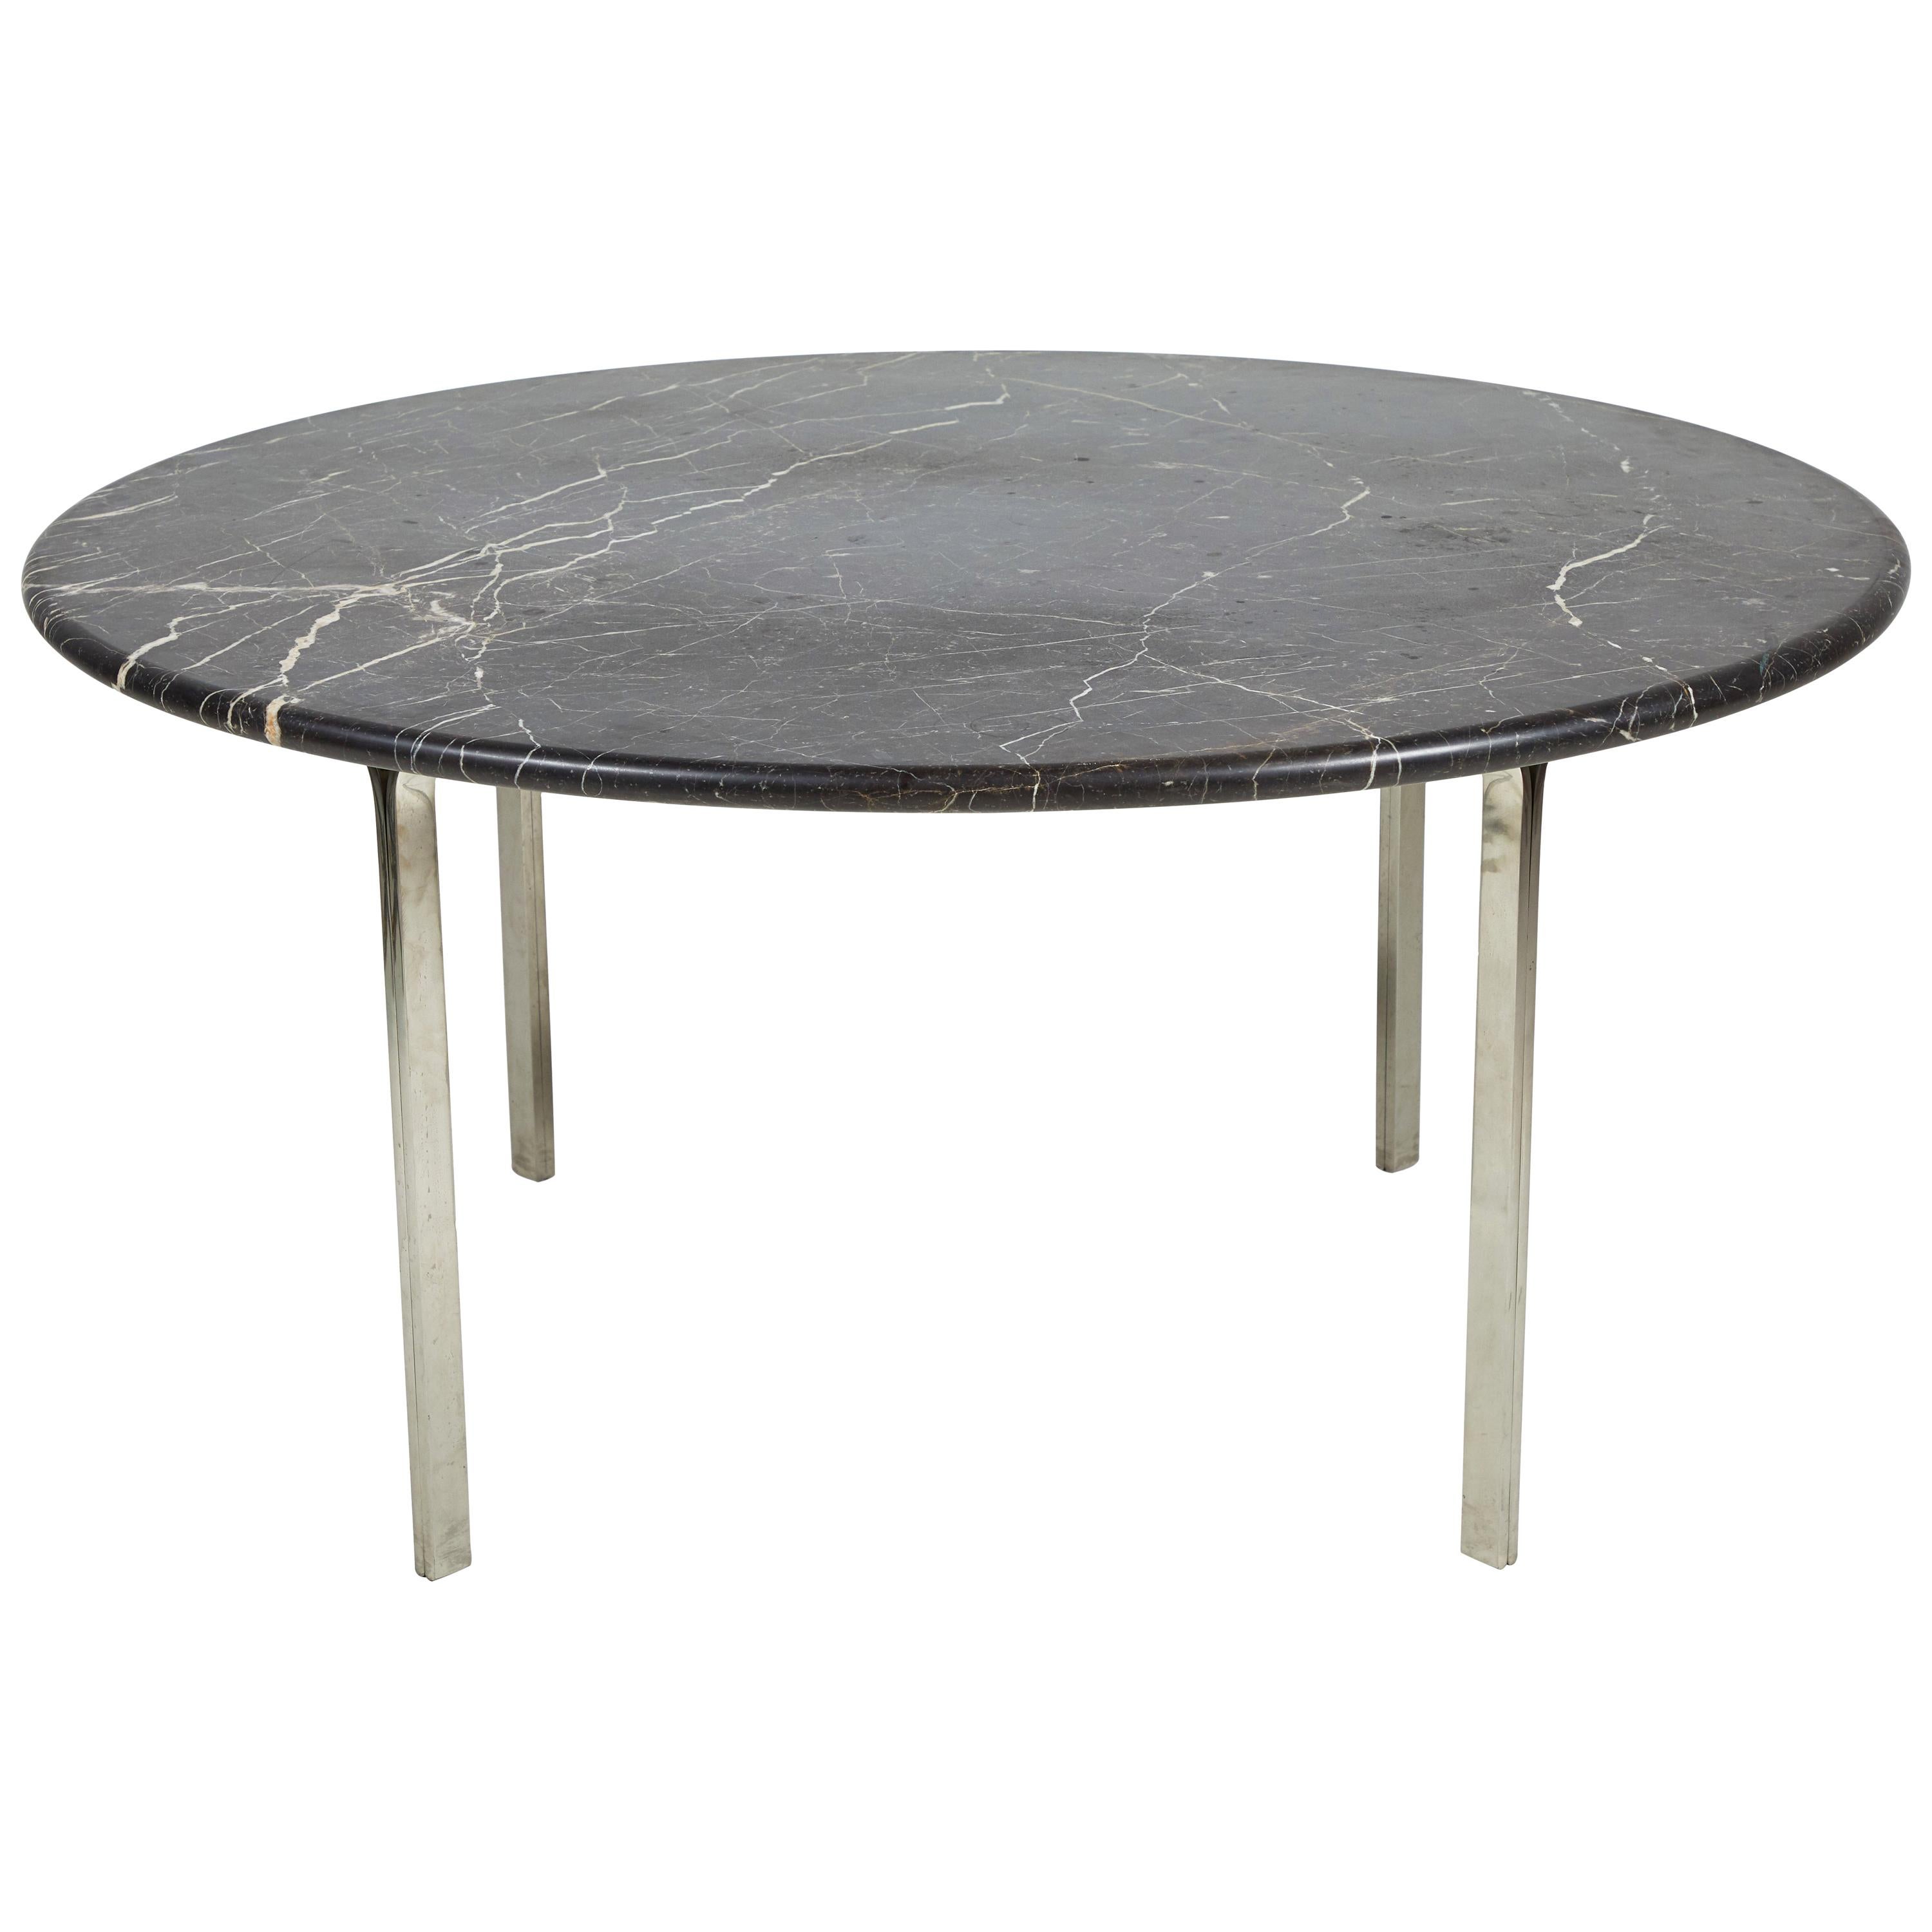 Black Marble and Chrome Round Dining Table